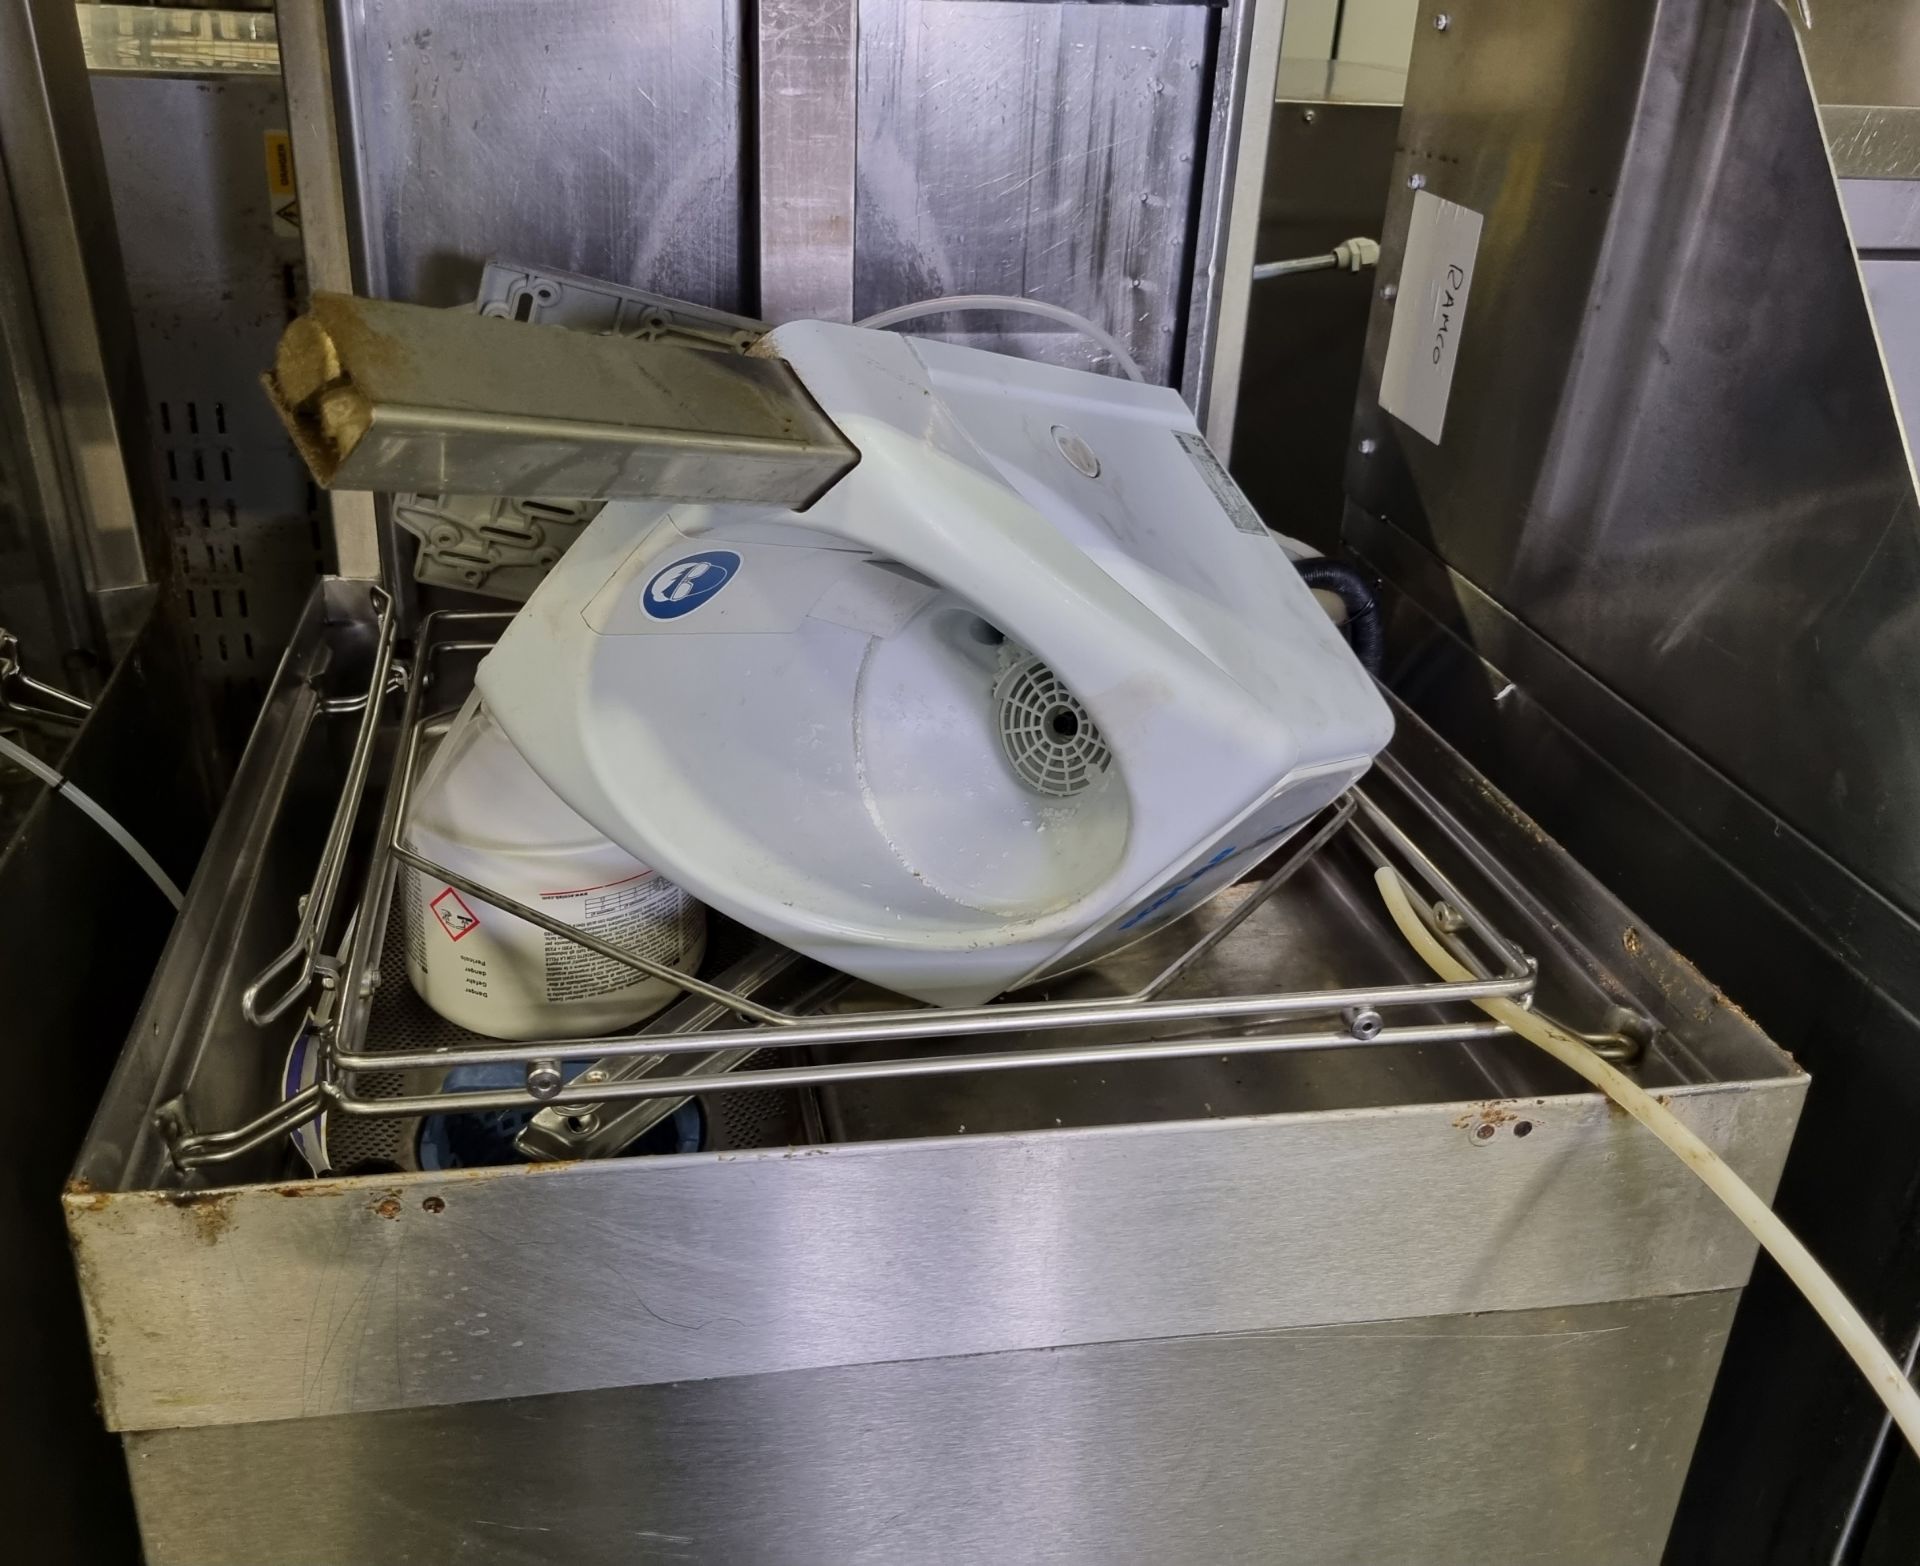 Hobart AMXX RS30 pass through dishwasher with Ecolab solid dosing unit - W 720 x D 900 x H 1550 mm - Image 3 of 4